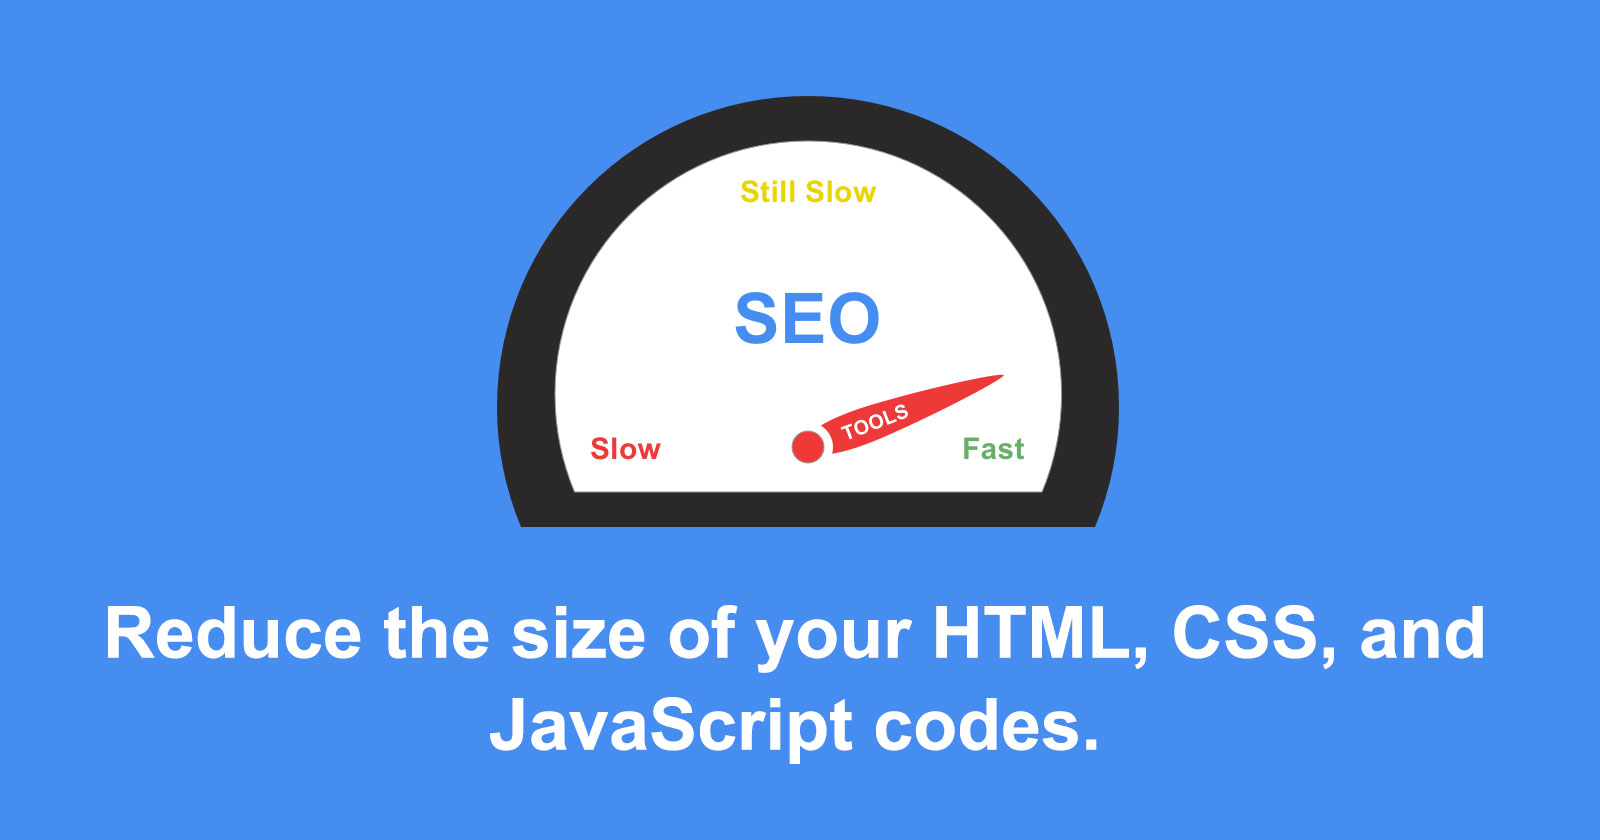 Reduce the size of your HTML, CSS, and JavaScript codes.